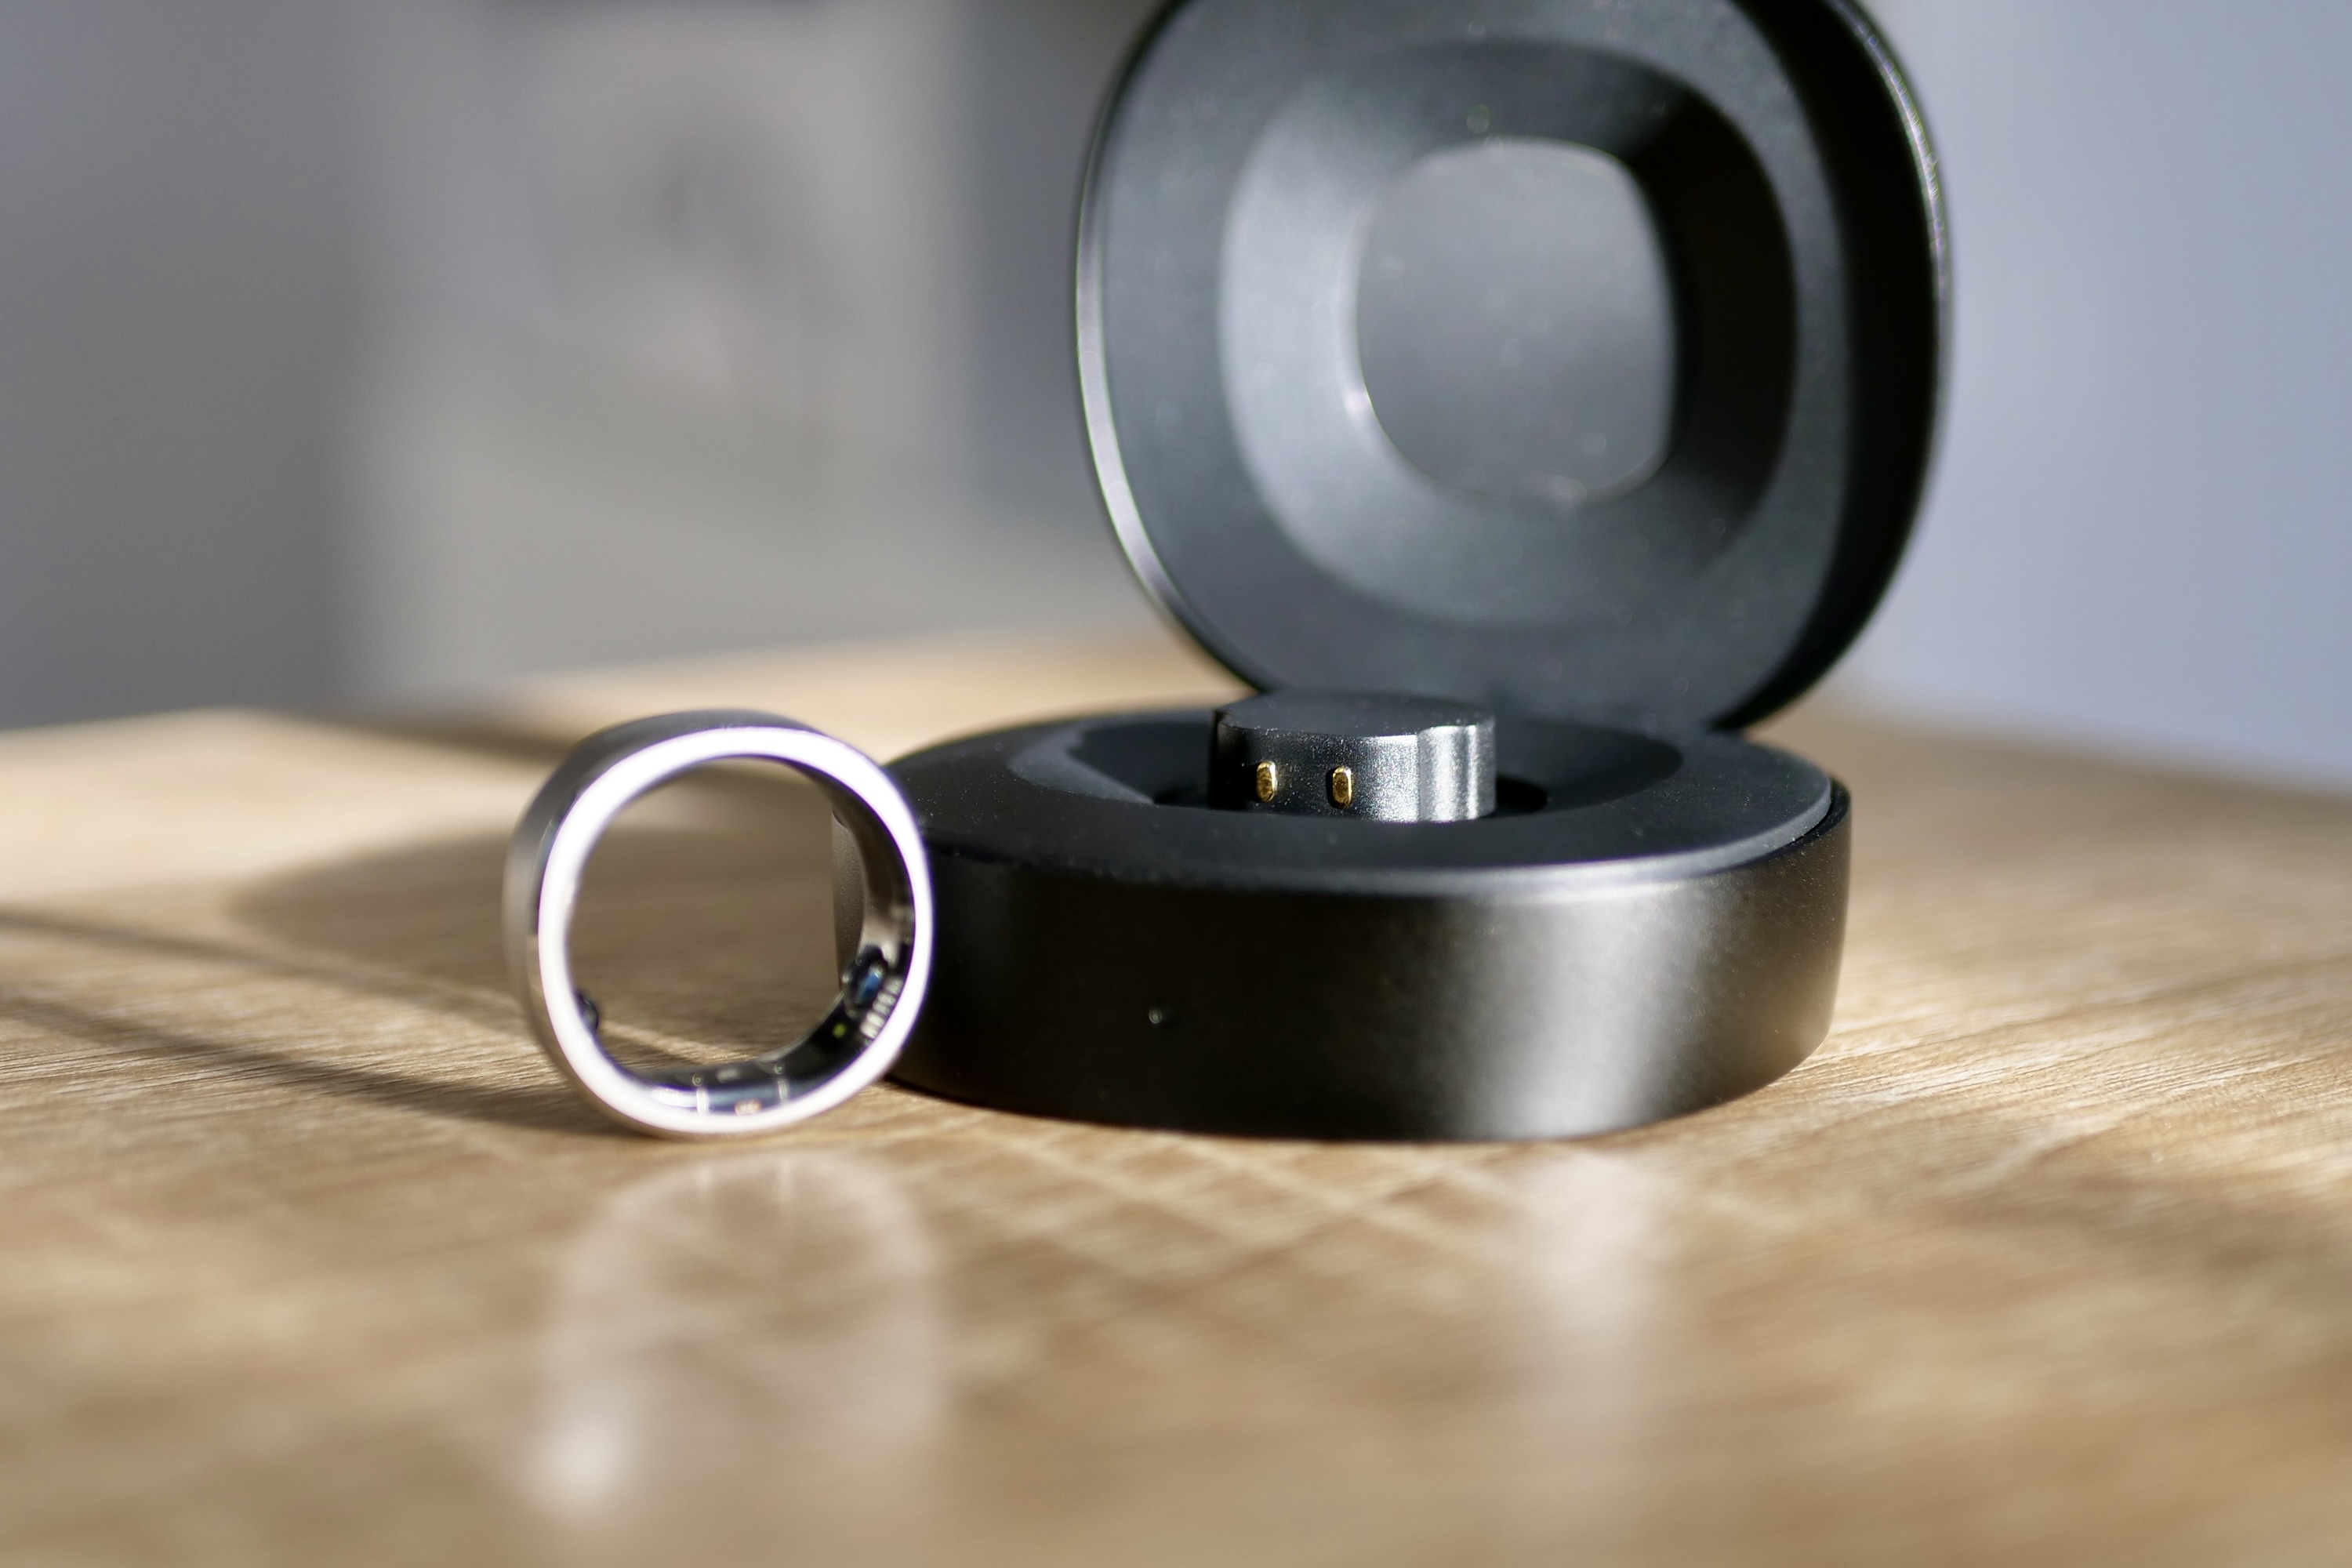 The RingConn Smart Ring next to the open travel charger case.